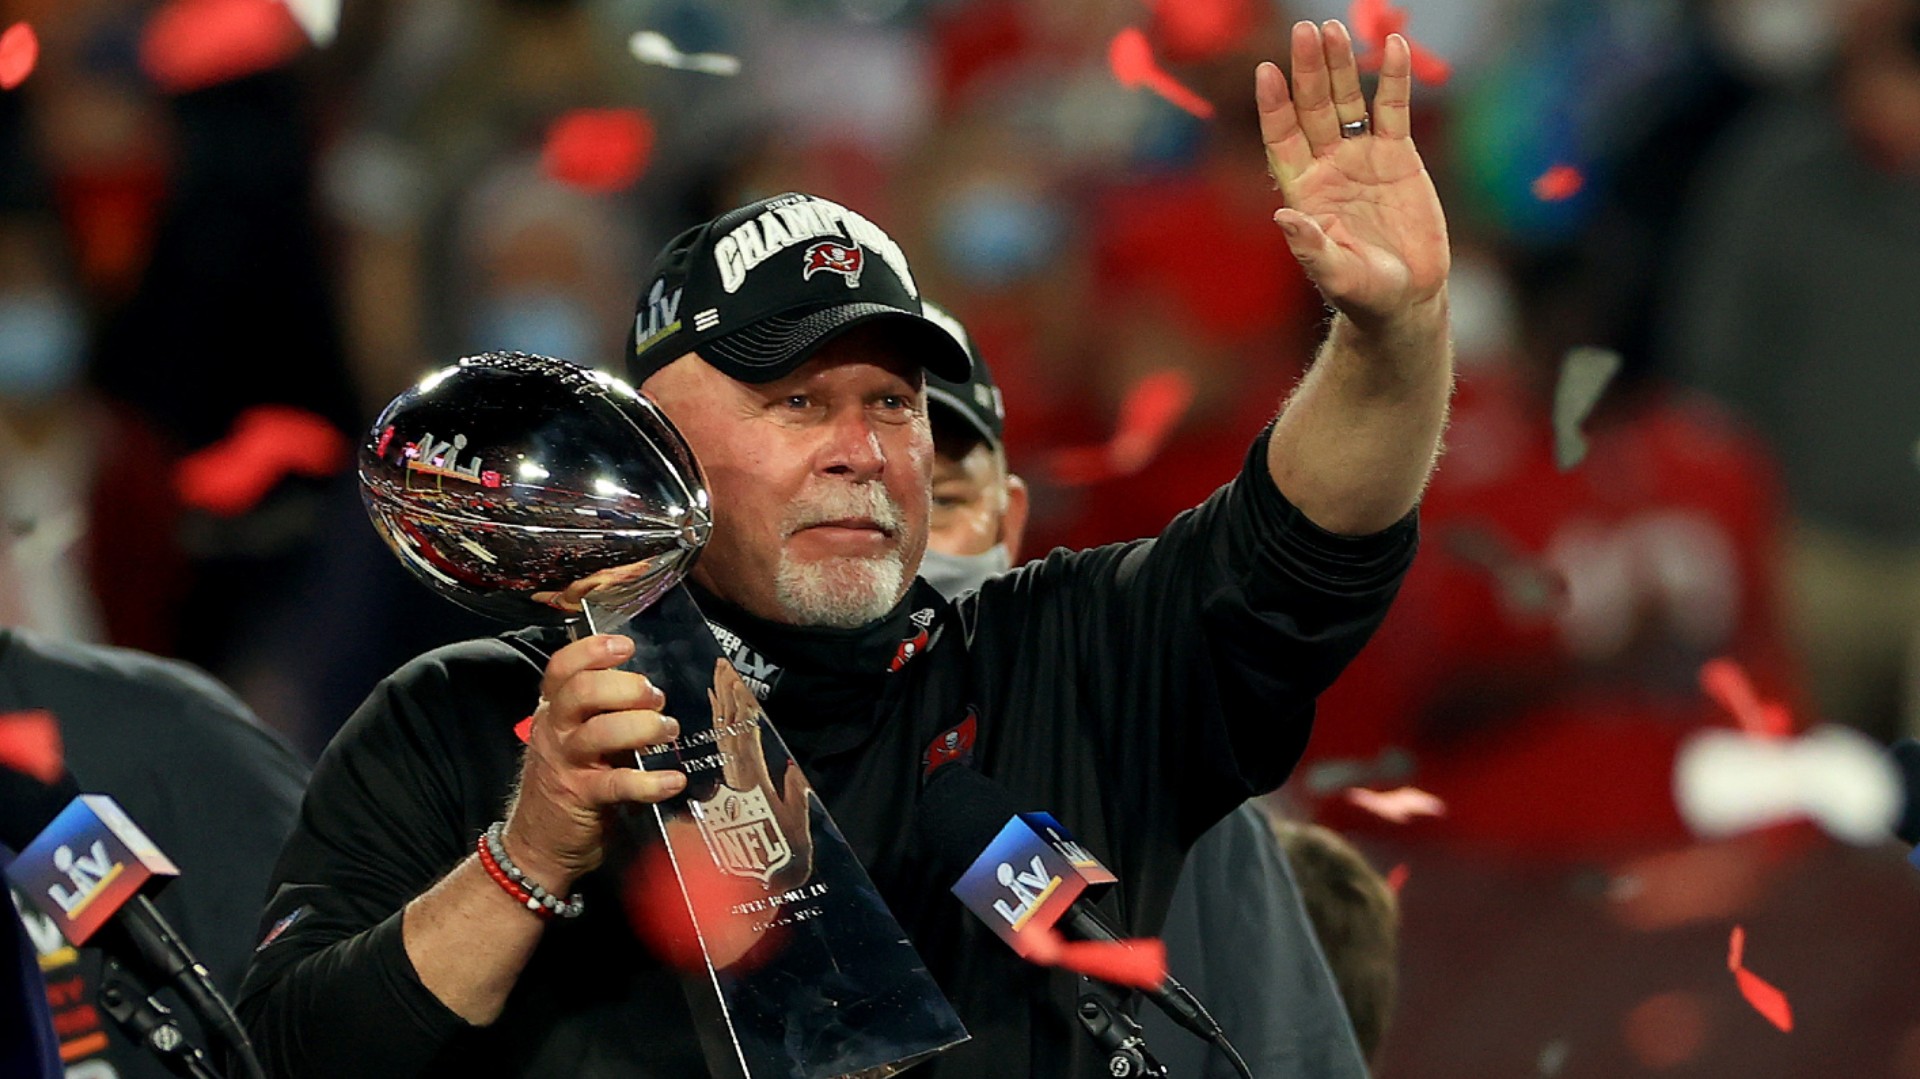 Super Bowl LV: 'Hell no, I'm not going anywhere!' – Bucs coach Arians bringing it back after triumph